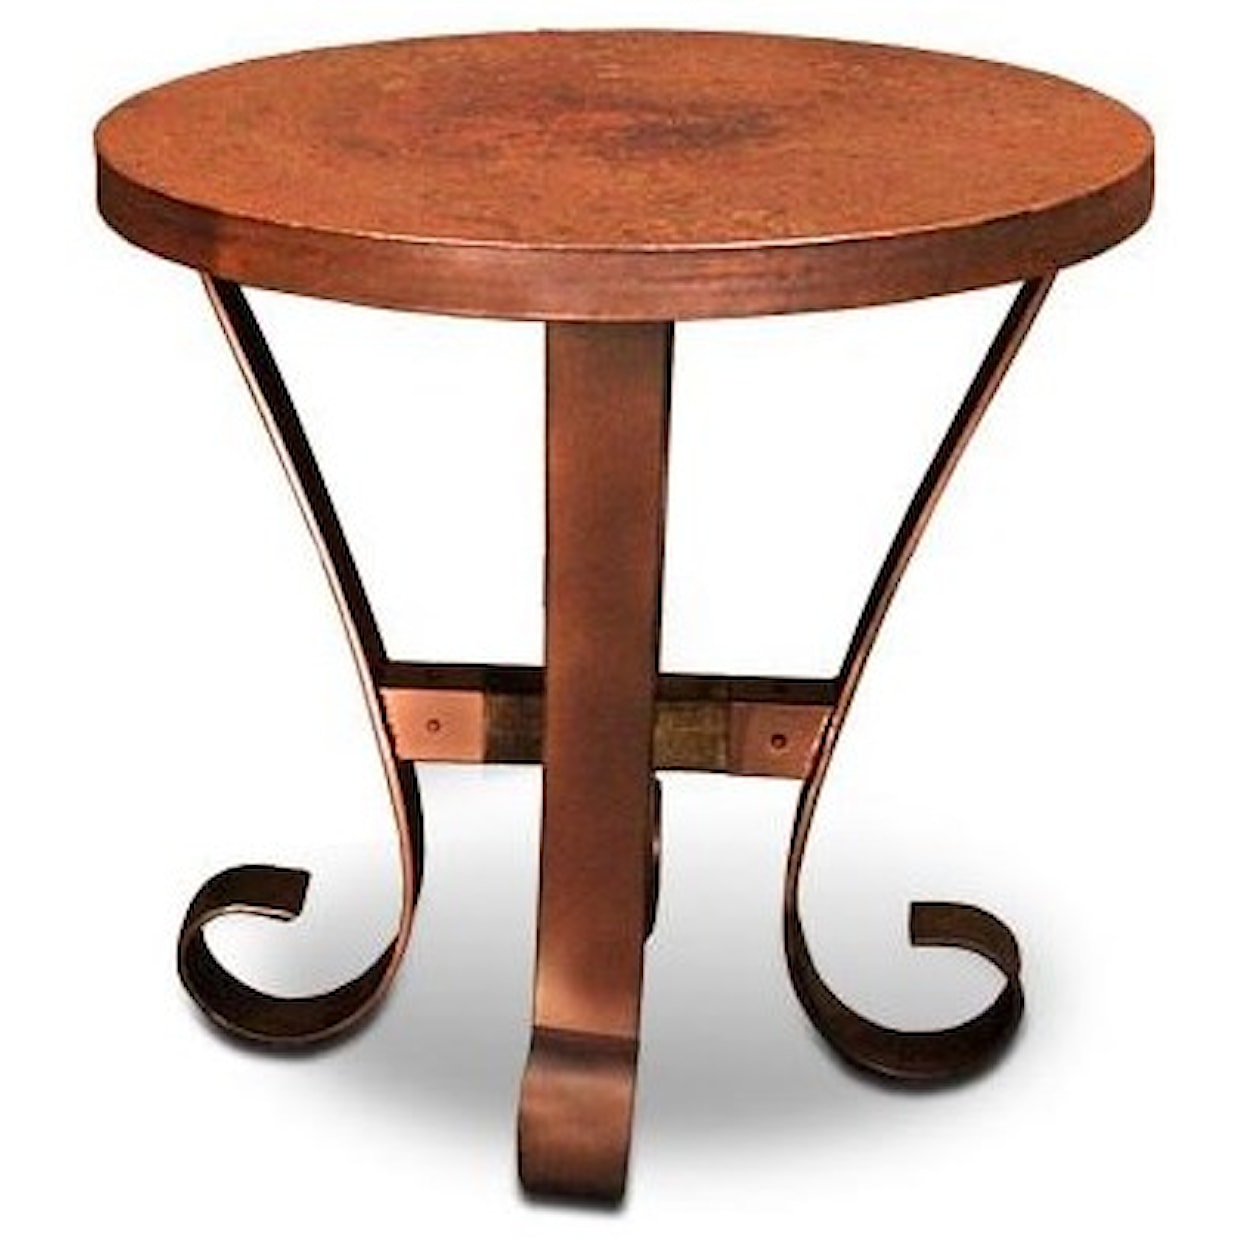 Horizon Home Barcelona Round Cocktail Table, Round End Table and Co